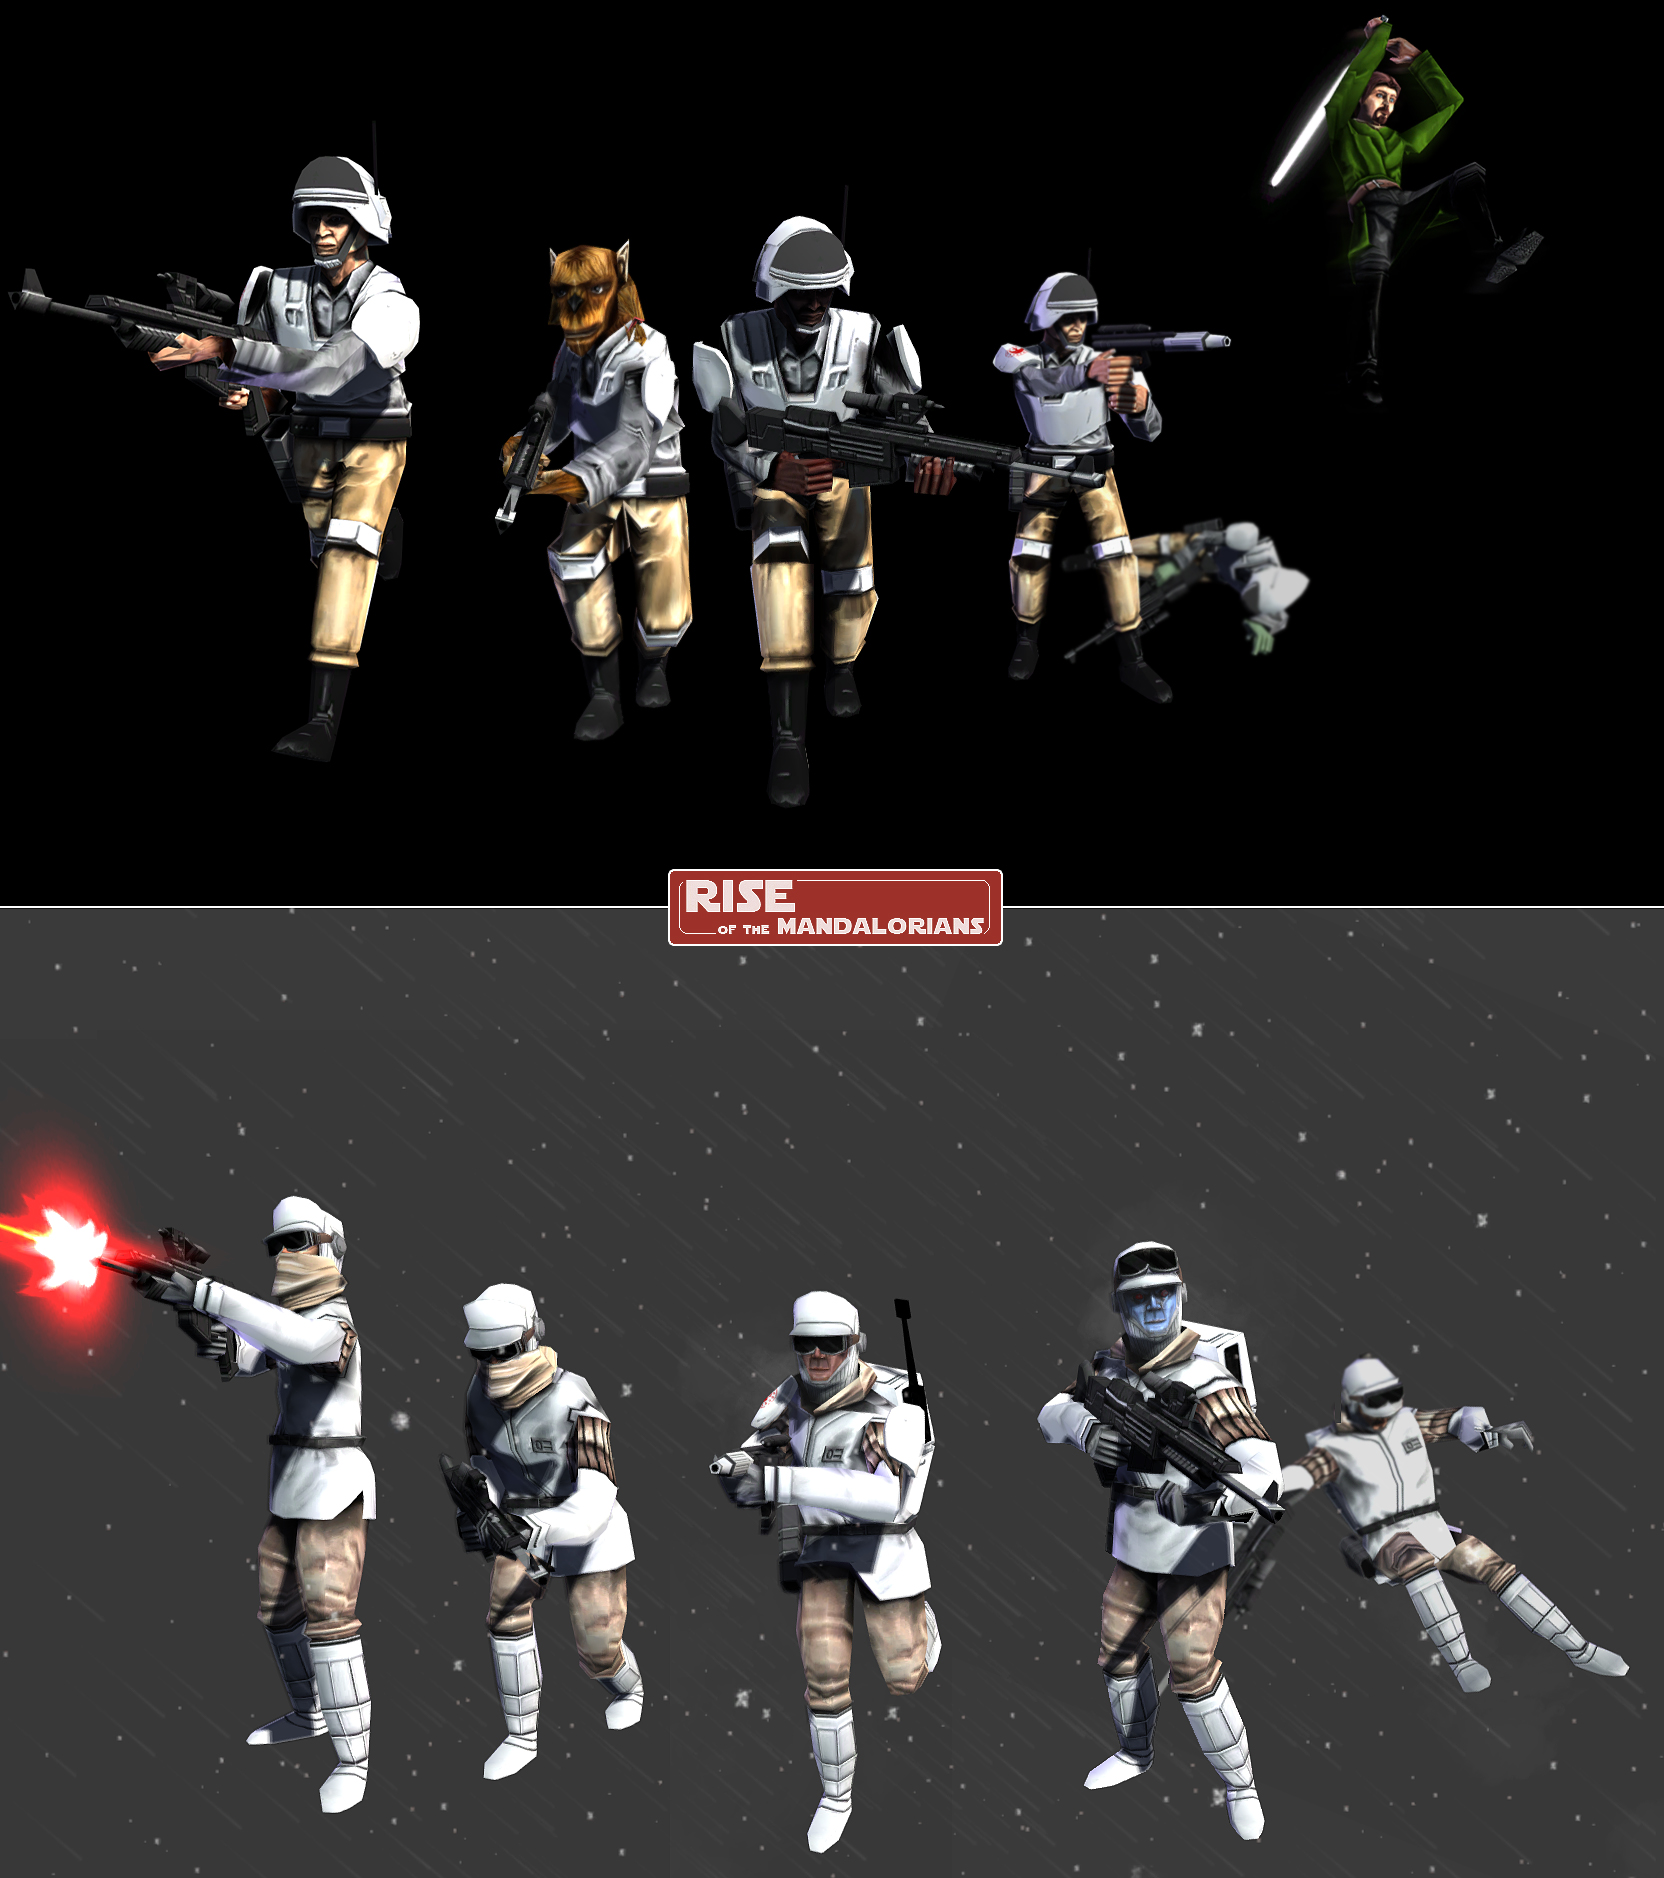 New Republic Infantry image - Rise of the Mandalorians mod for Star Wars:  Empire at War: Forces of Corruption - ModDB